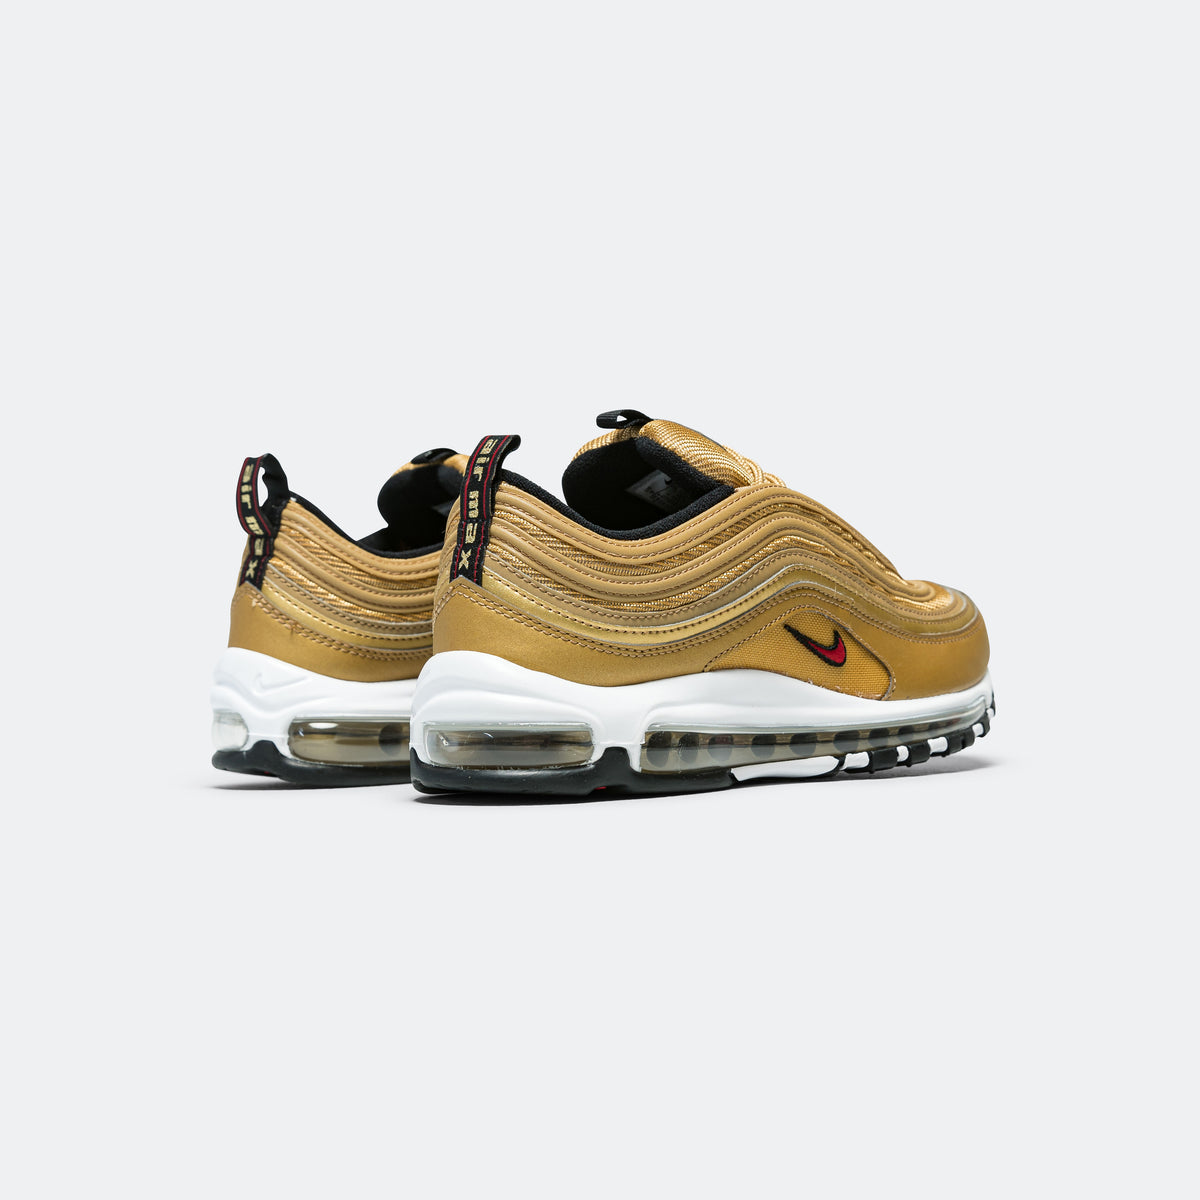 SOLECTION LV Undefeated x Nike Air Max 97 OG %article_desc% Source: Sneaker  NewsUNDEFEATED X NIKE AIR MAX 97 OGRELEASE DATE: September 2017 Color:  Black/Gorge Green/White-Speed Red Style Code: AJ1986-001 air max, black